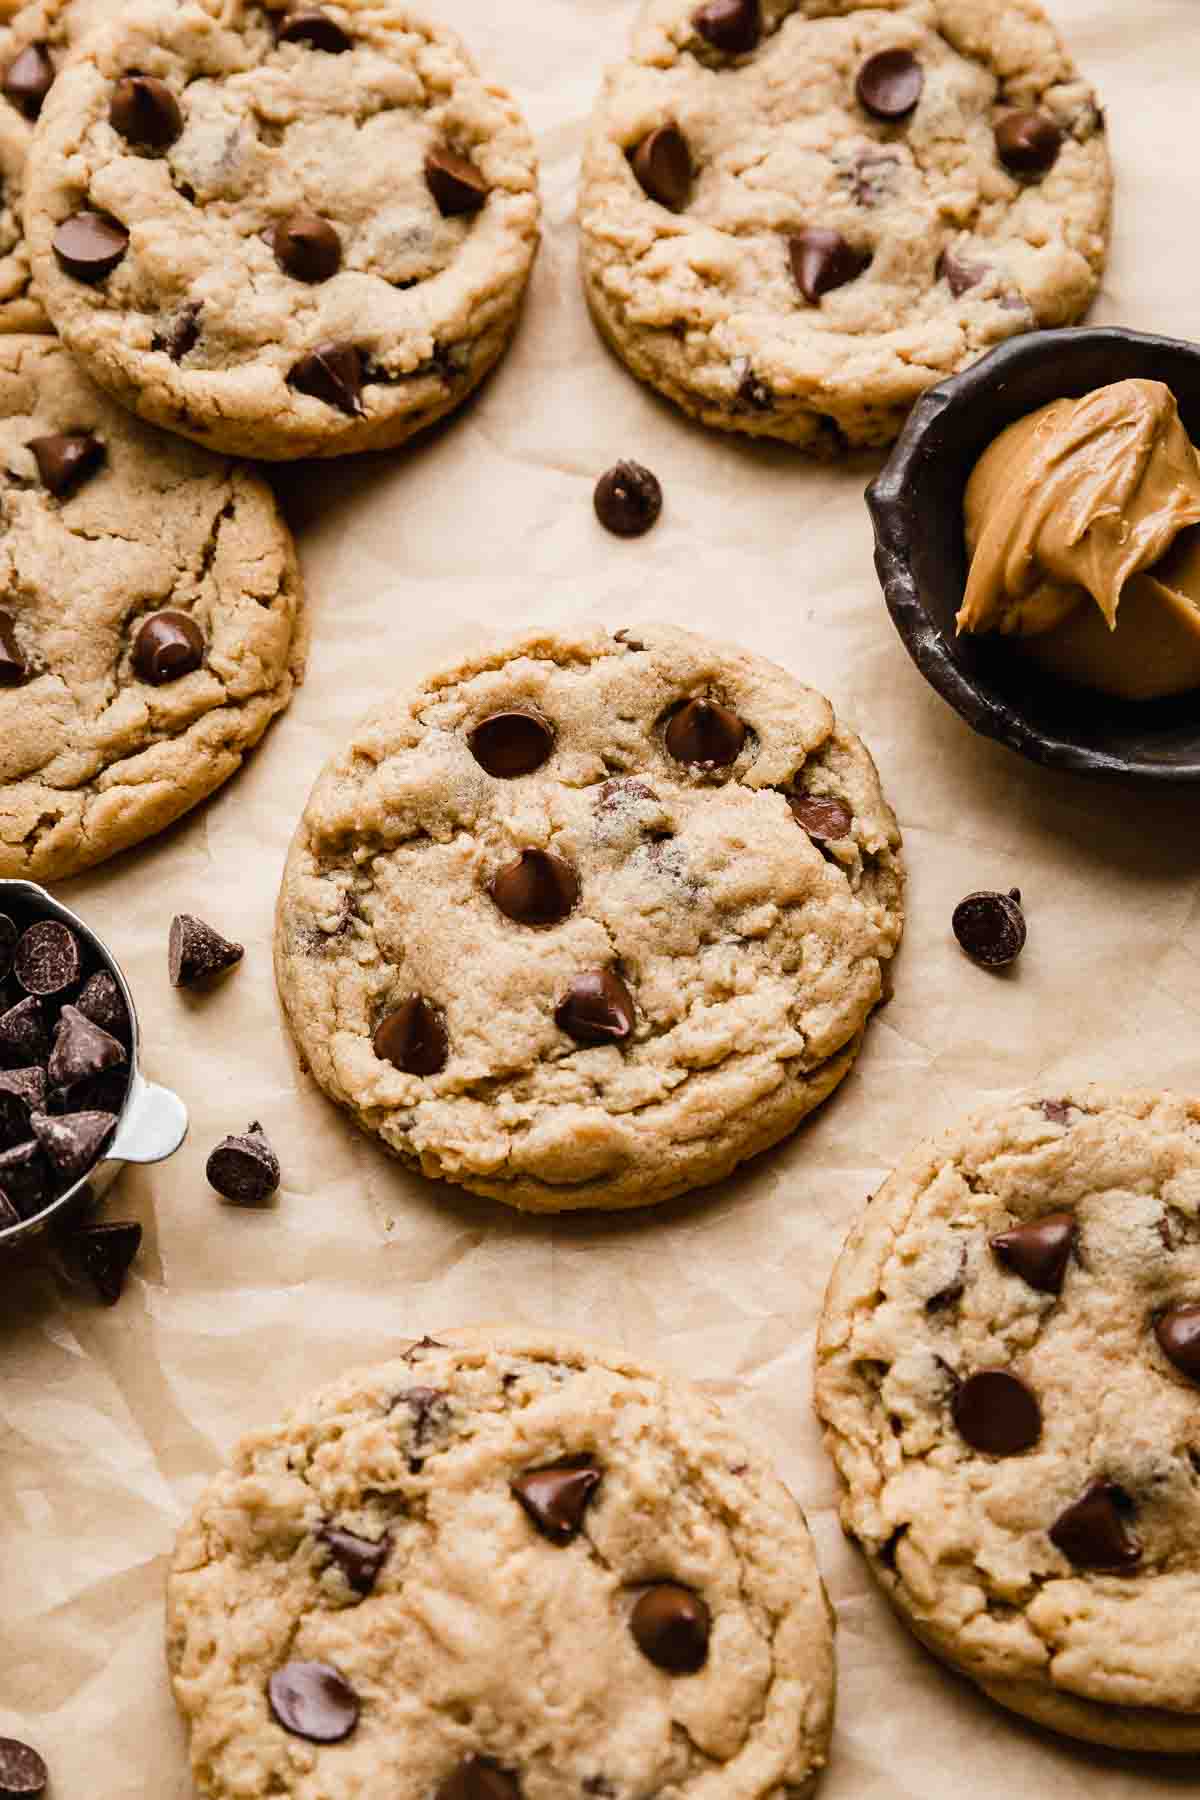 Chocolate chip peanut butter cookies on a light brown background with chocolate chips scattered around the cookies.